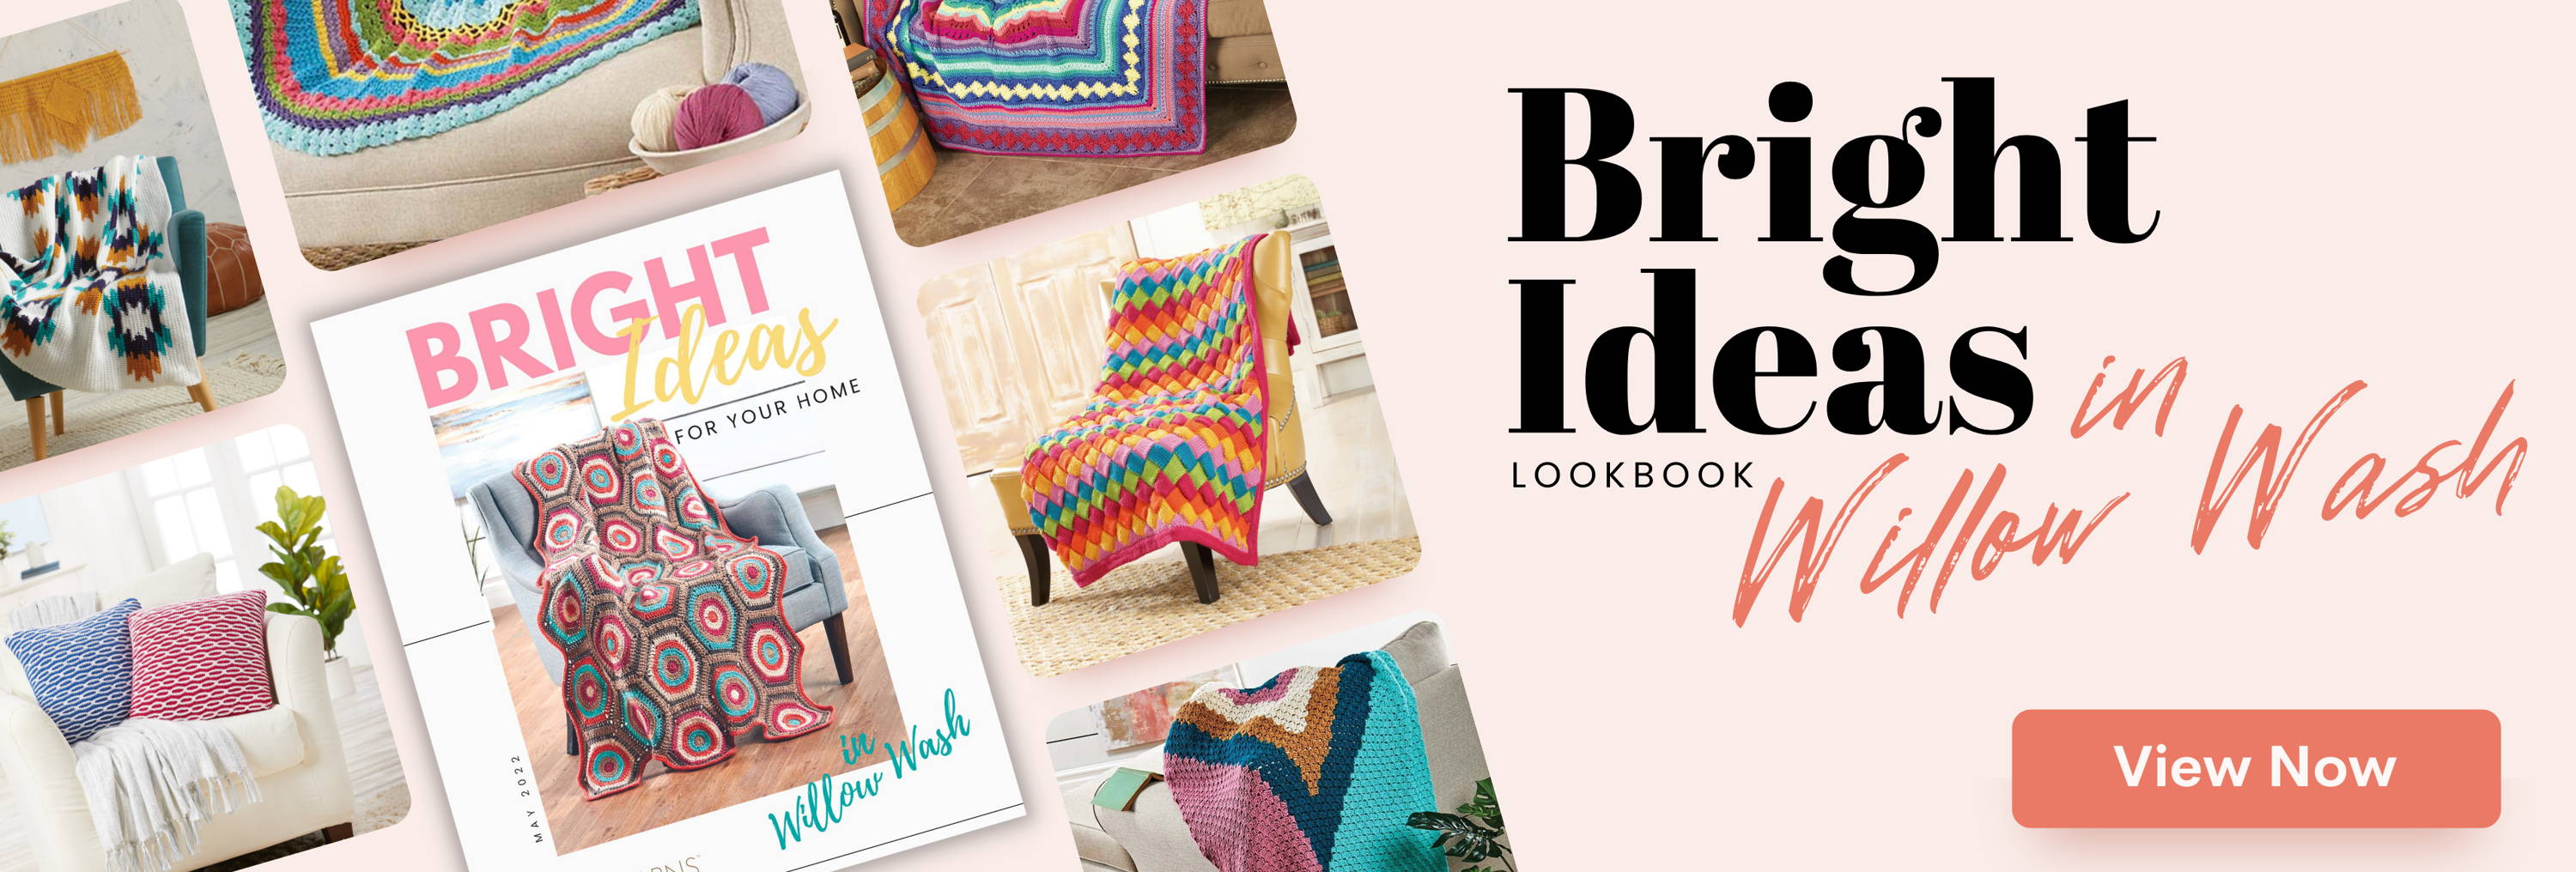 Bright Ideas in Willow Wash Lookbook. View Now. >>